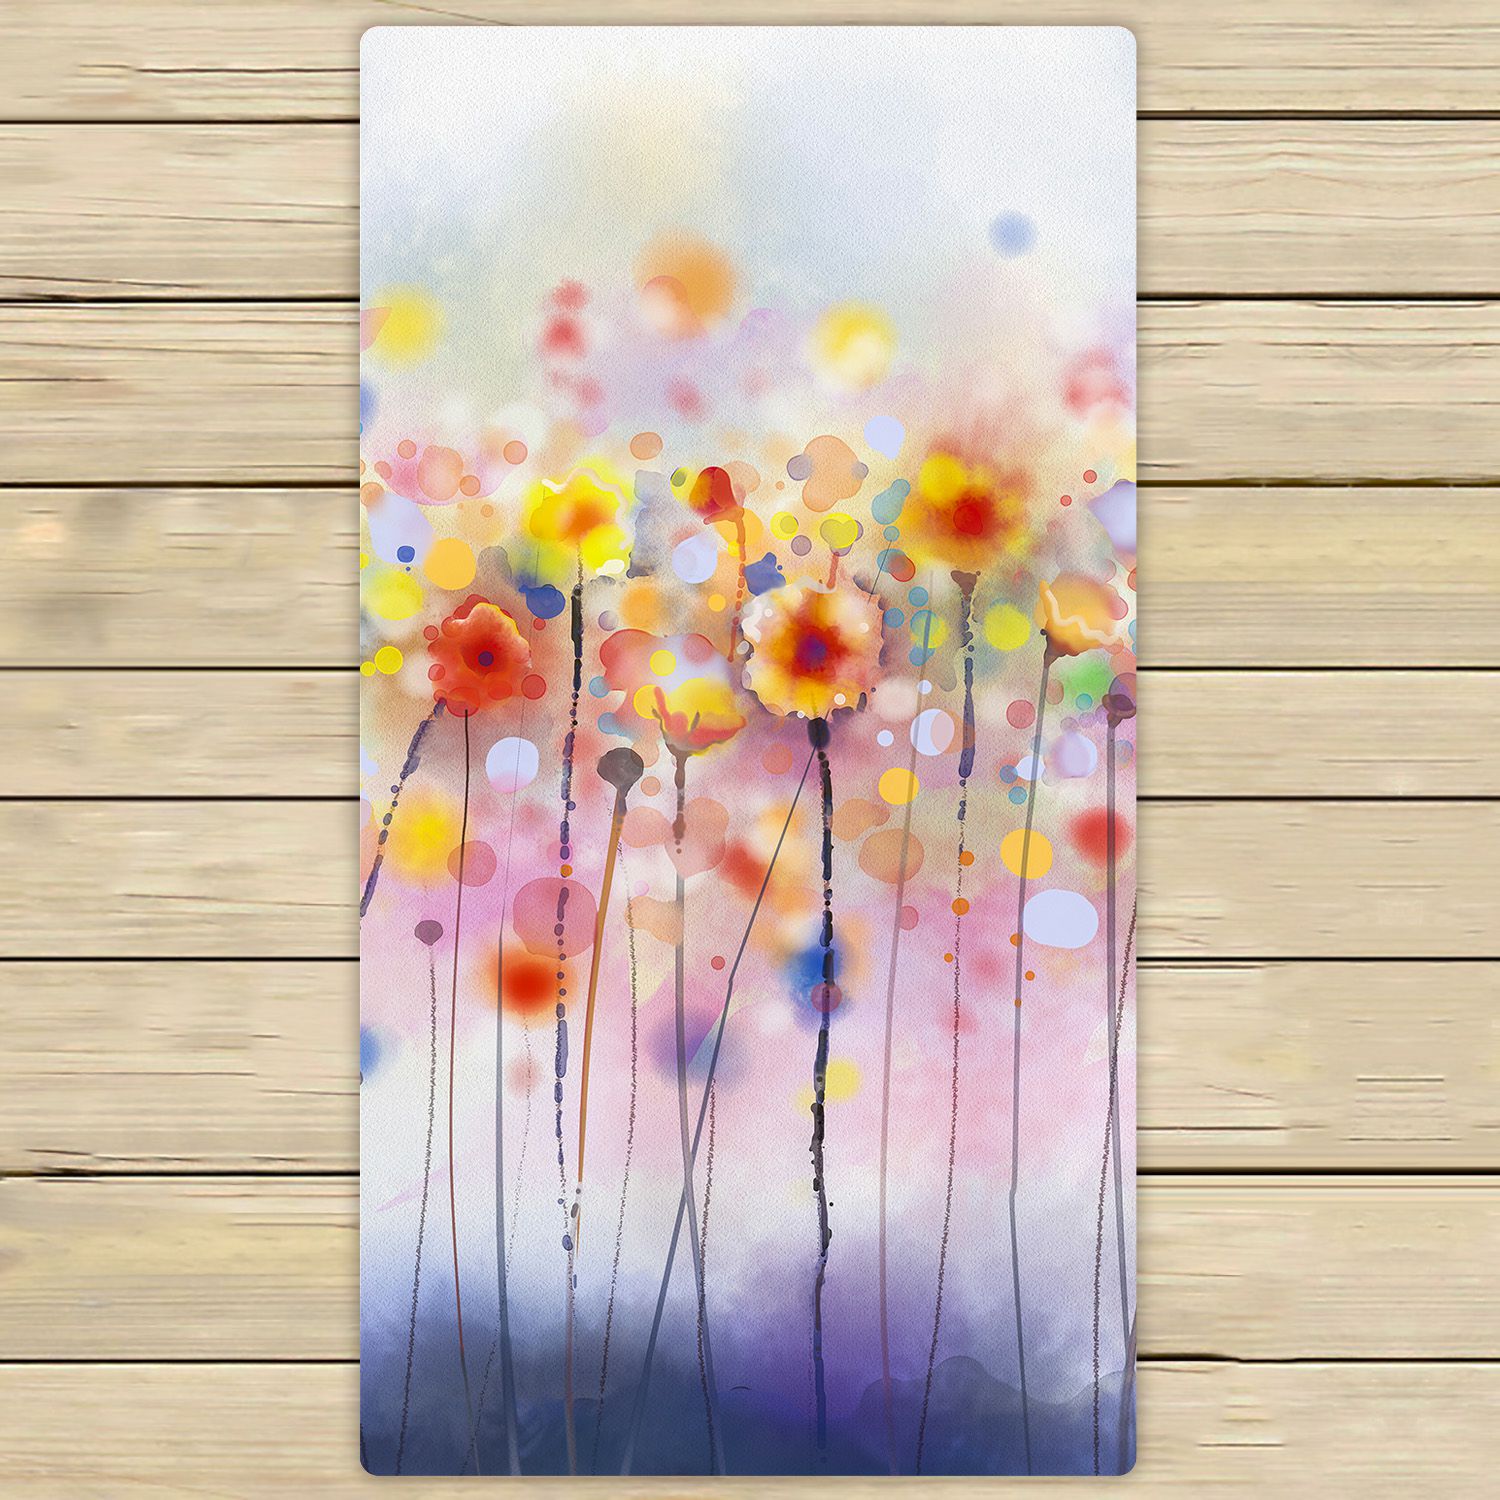 PHFZK Watercolor Flower Towel, Flowers in Soft Colors and Floral Design Blurred Style Hand Towel Bath Bathroom Shower Towels Beach Towel 30x56 inches - image 1 of 3